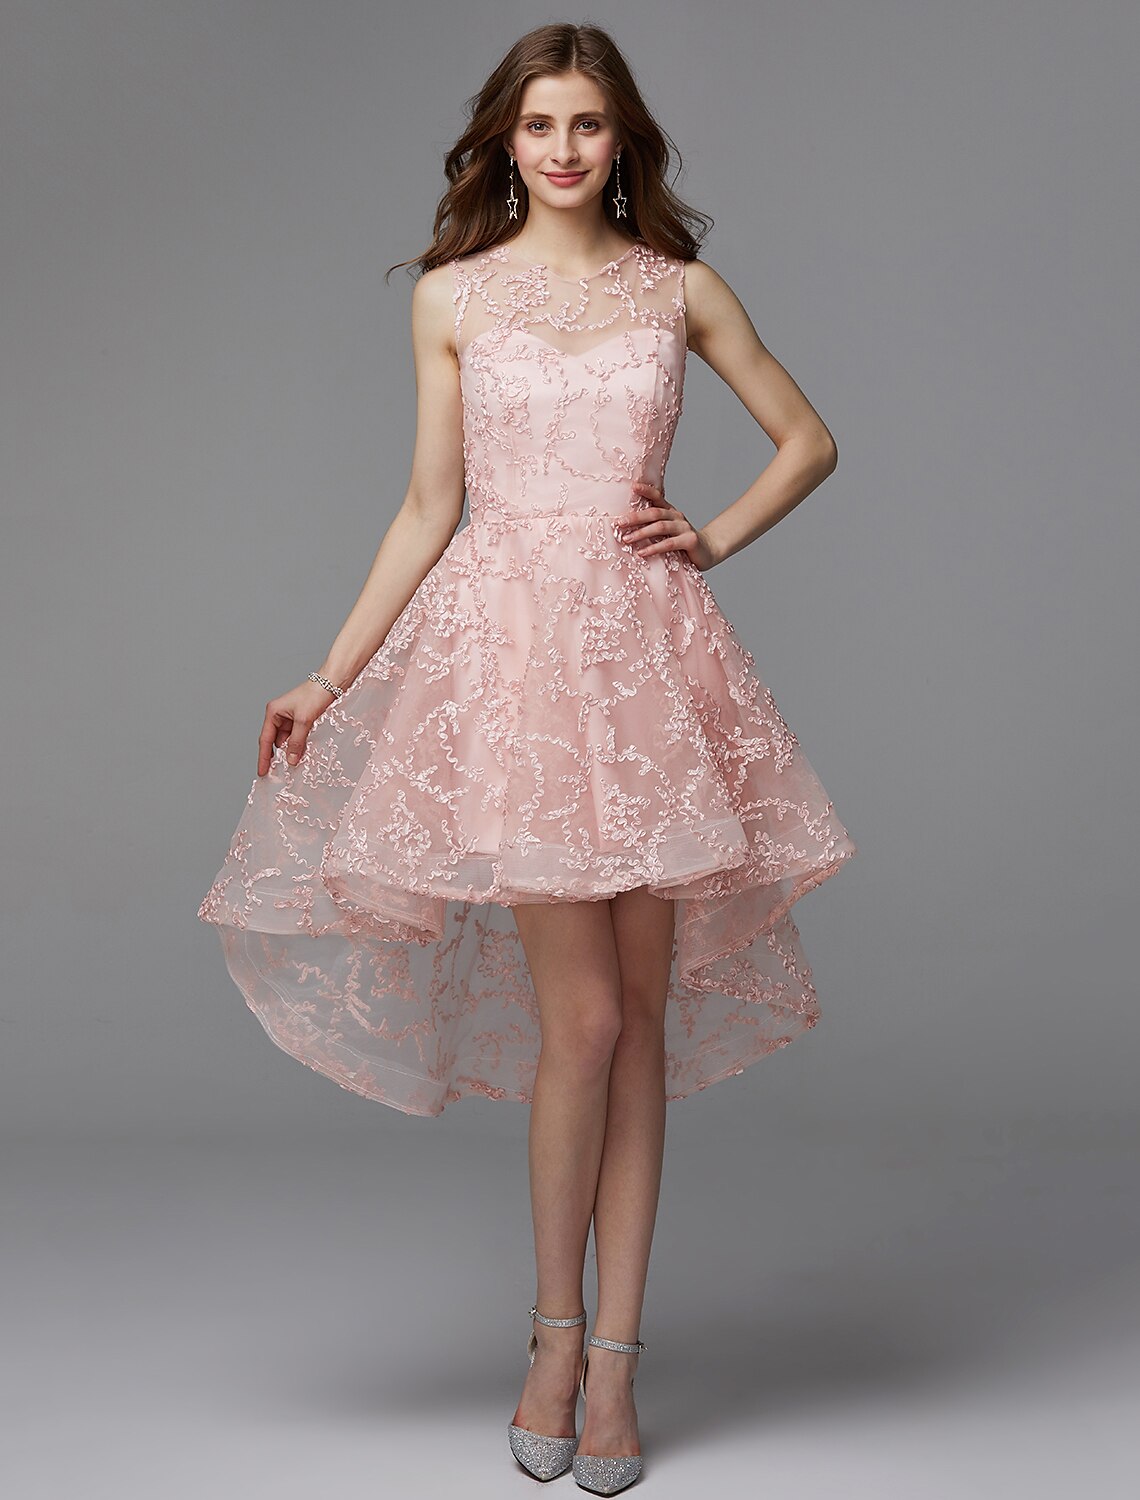 A-Line Hot Dress Wedding Guest Asymmetrical Sleeveless Illusion Neck Tulle with Appliques